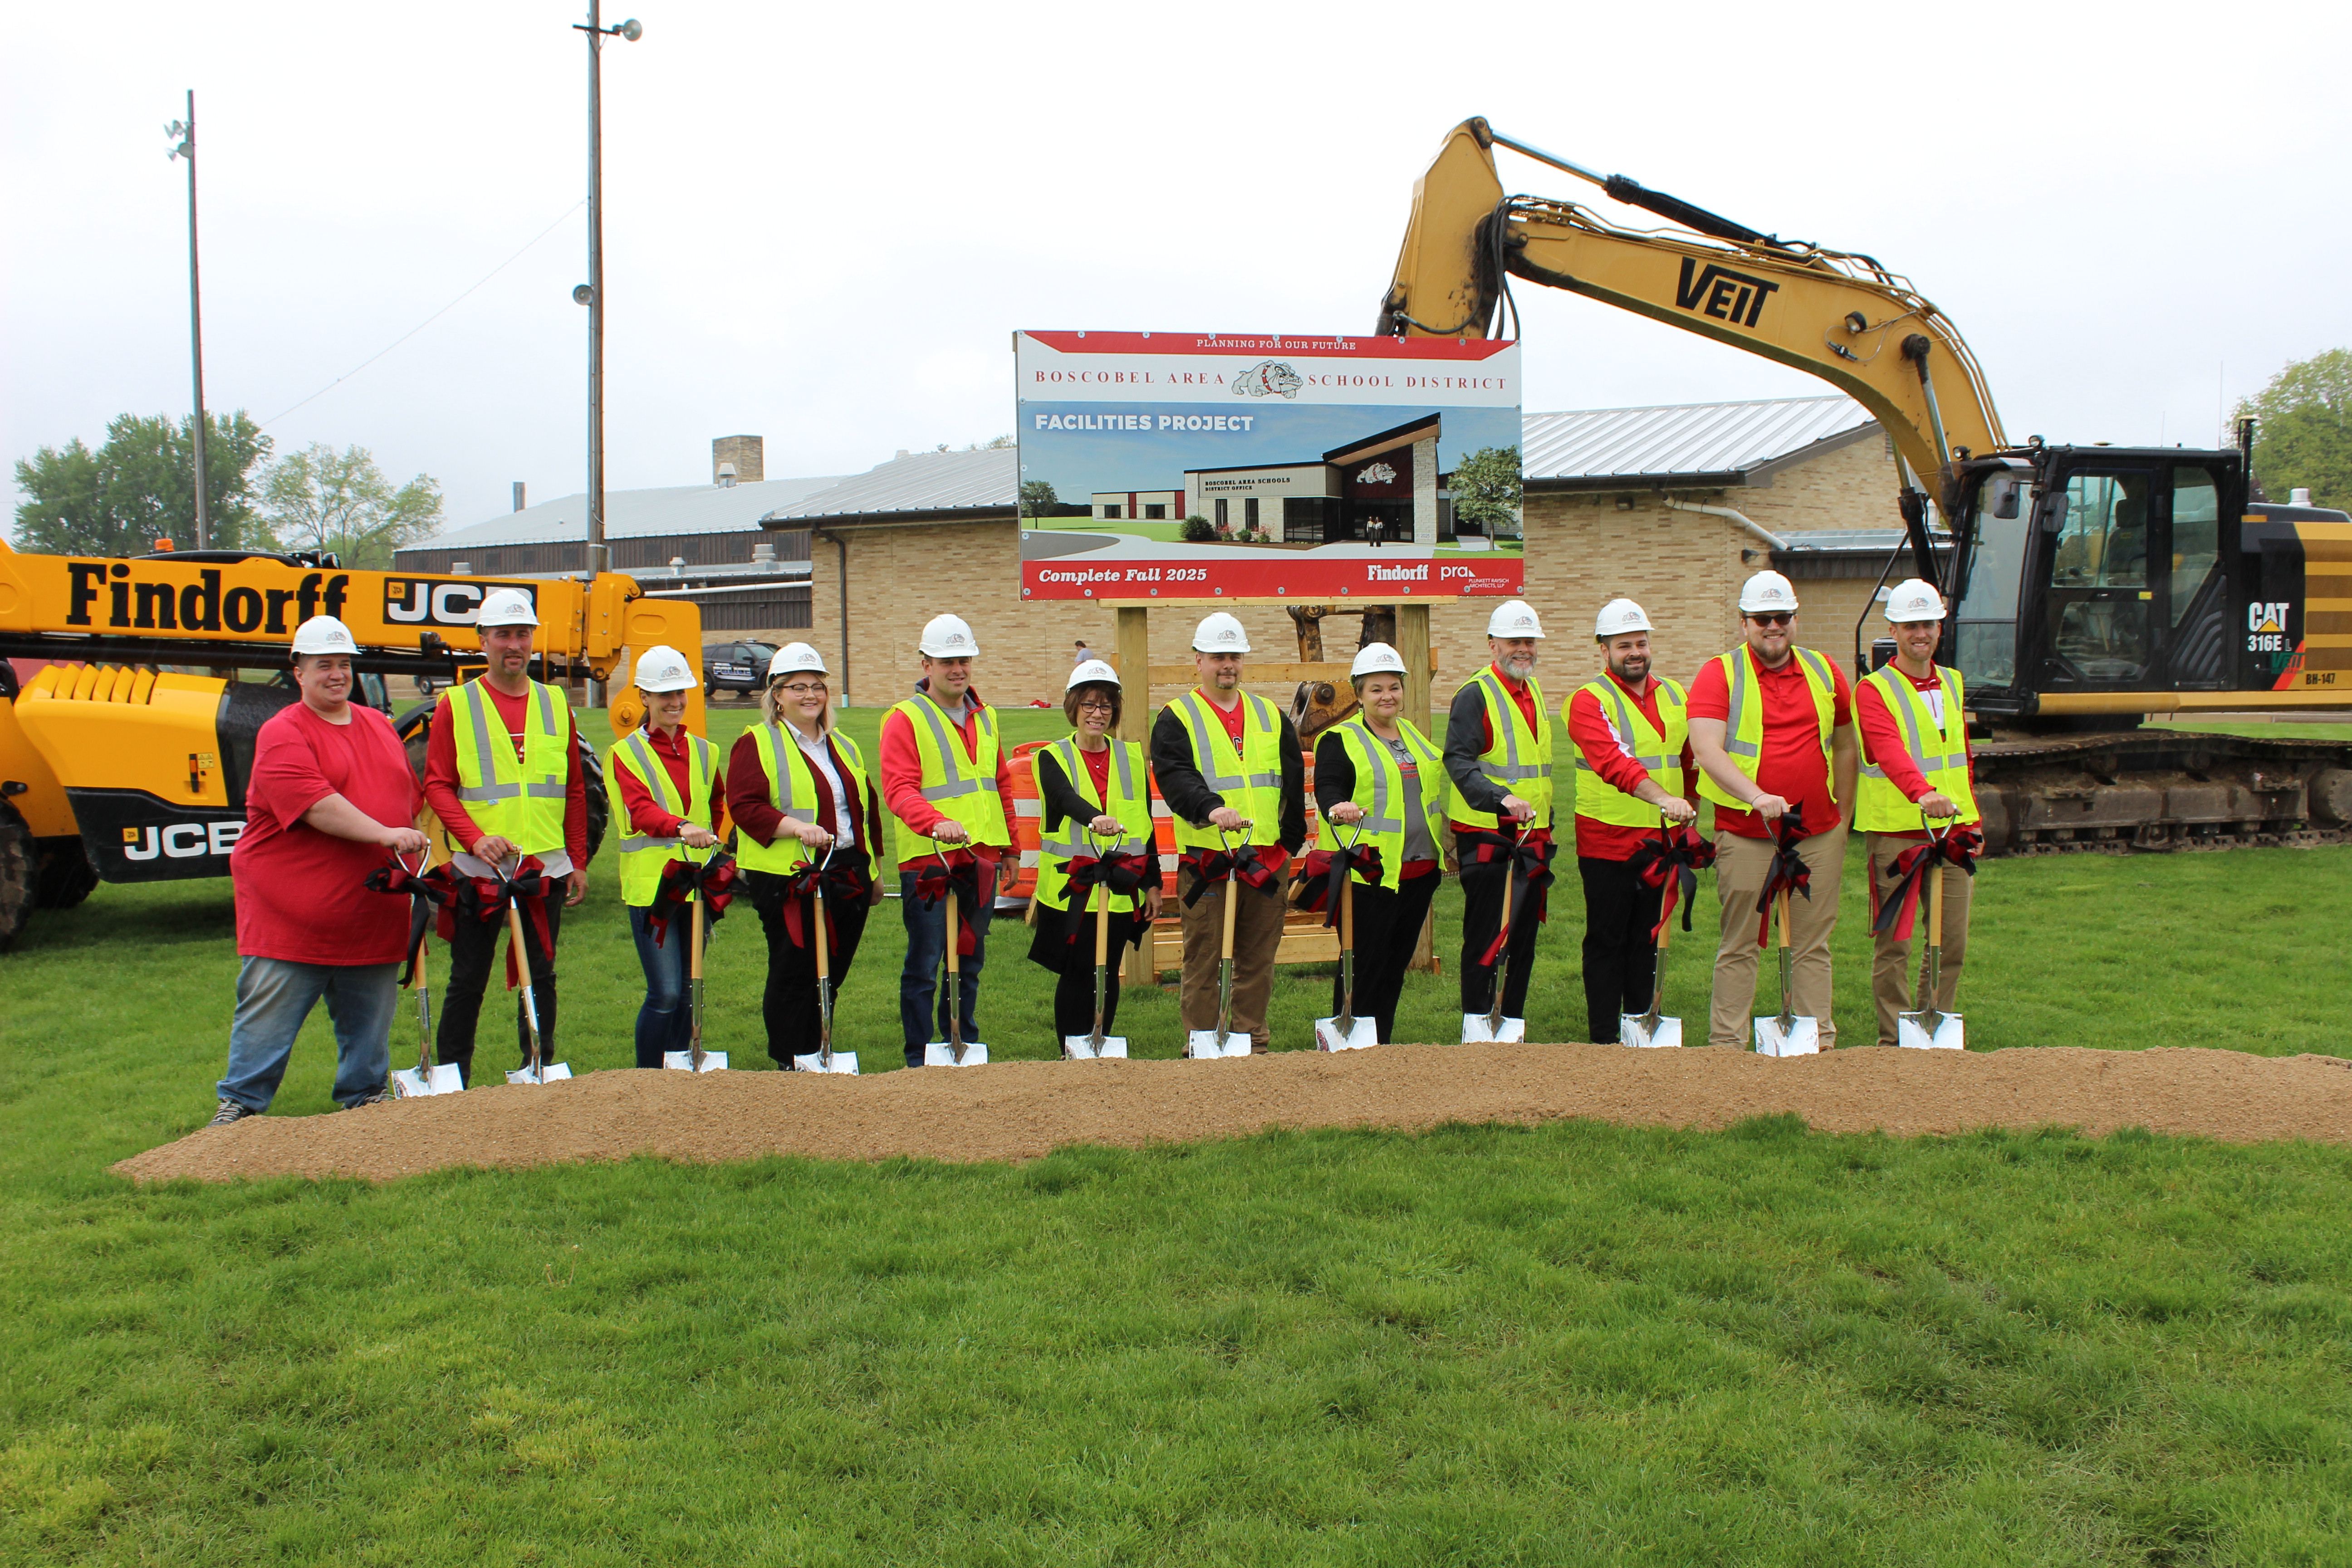 Boscobel School District holds groundbreaking event for new additions to middle/high school